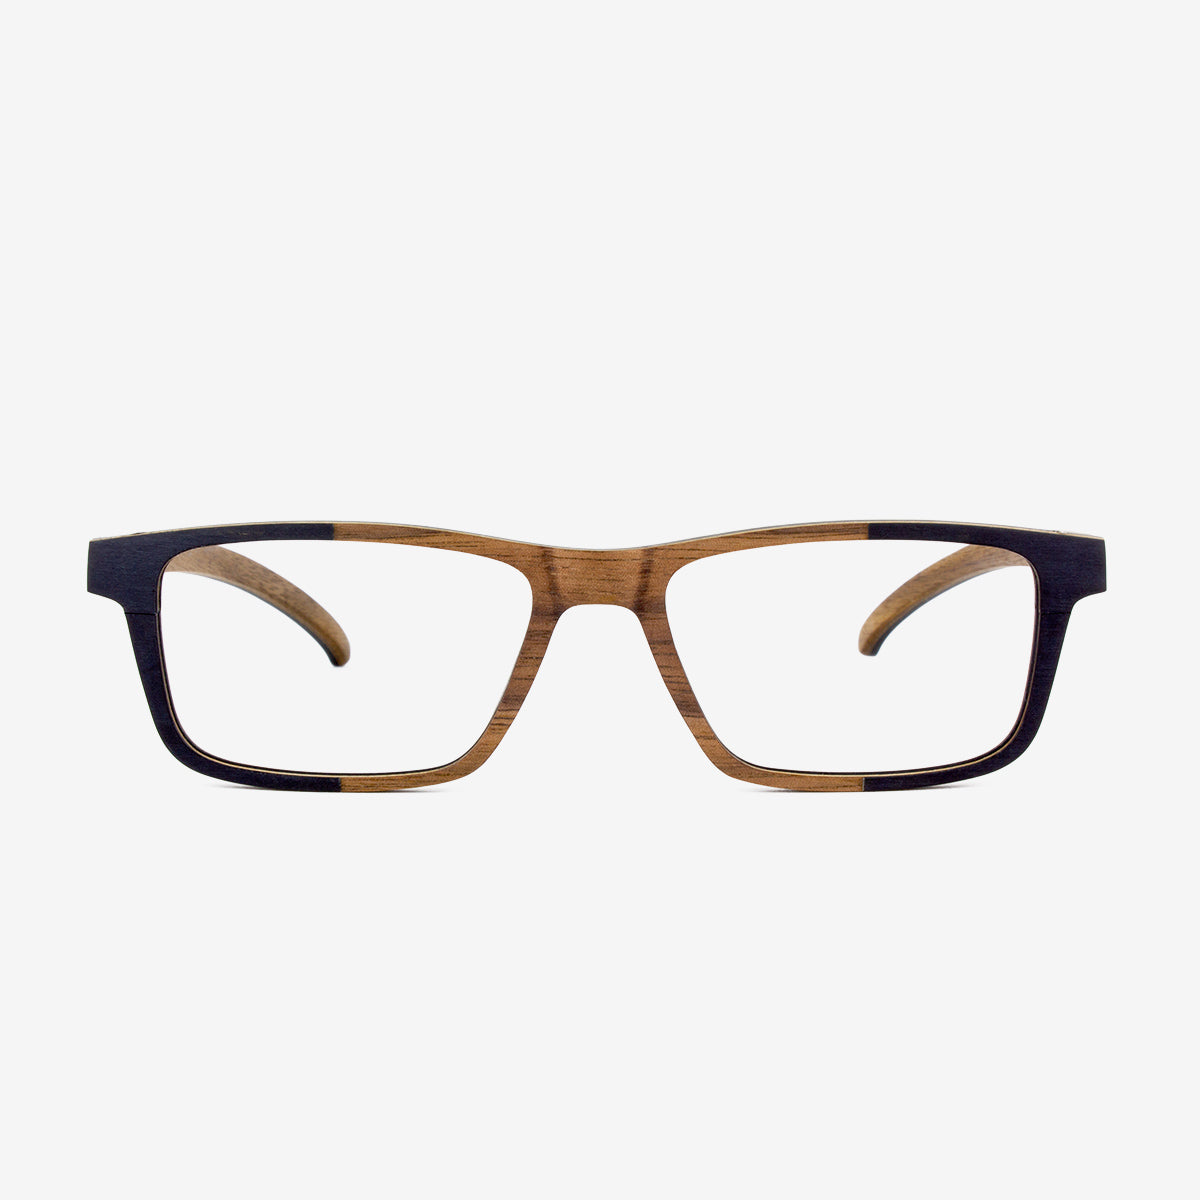 Handcrafted black maple and walnut wooden eyeglass frames